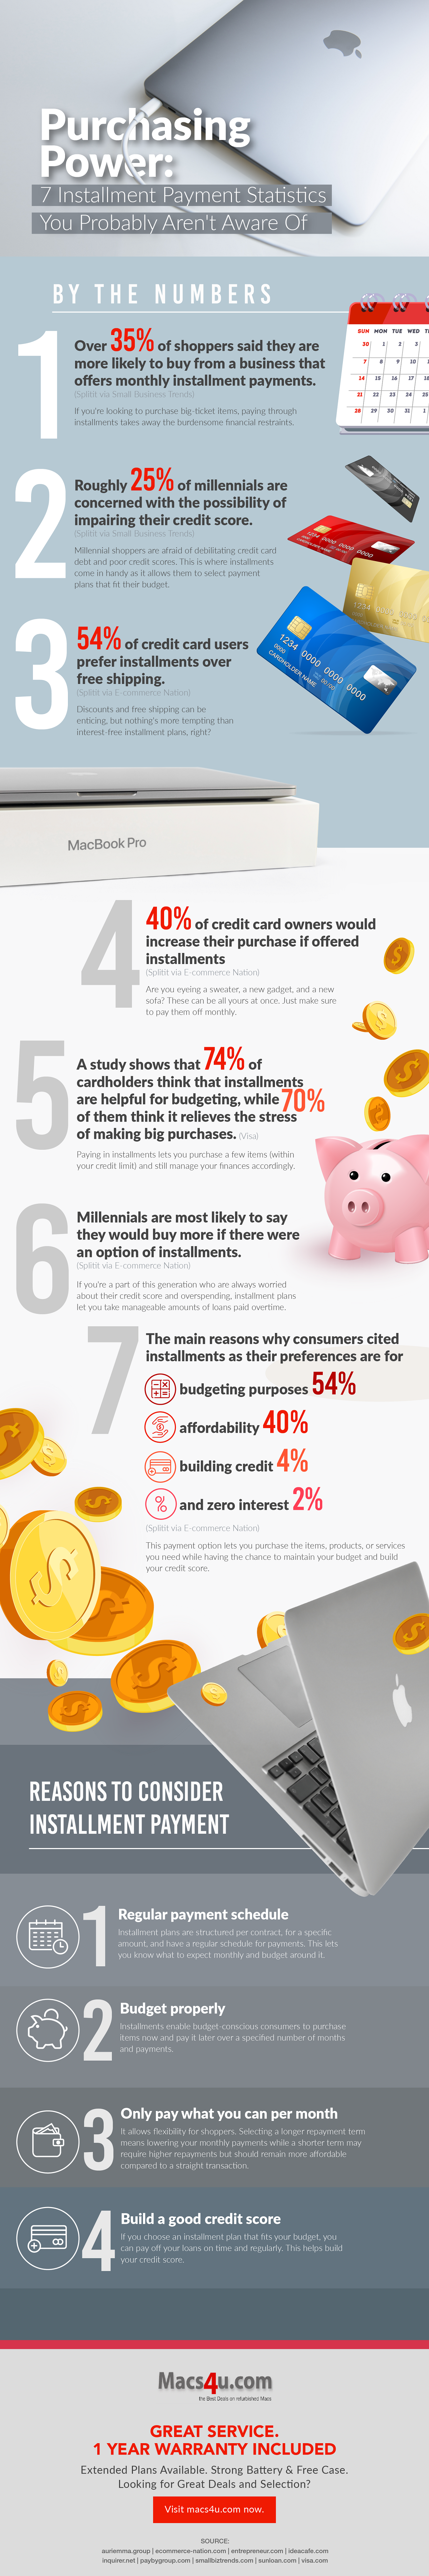 7 Installment Payment Statistics You Probably Aren’t Aware of #infographic